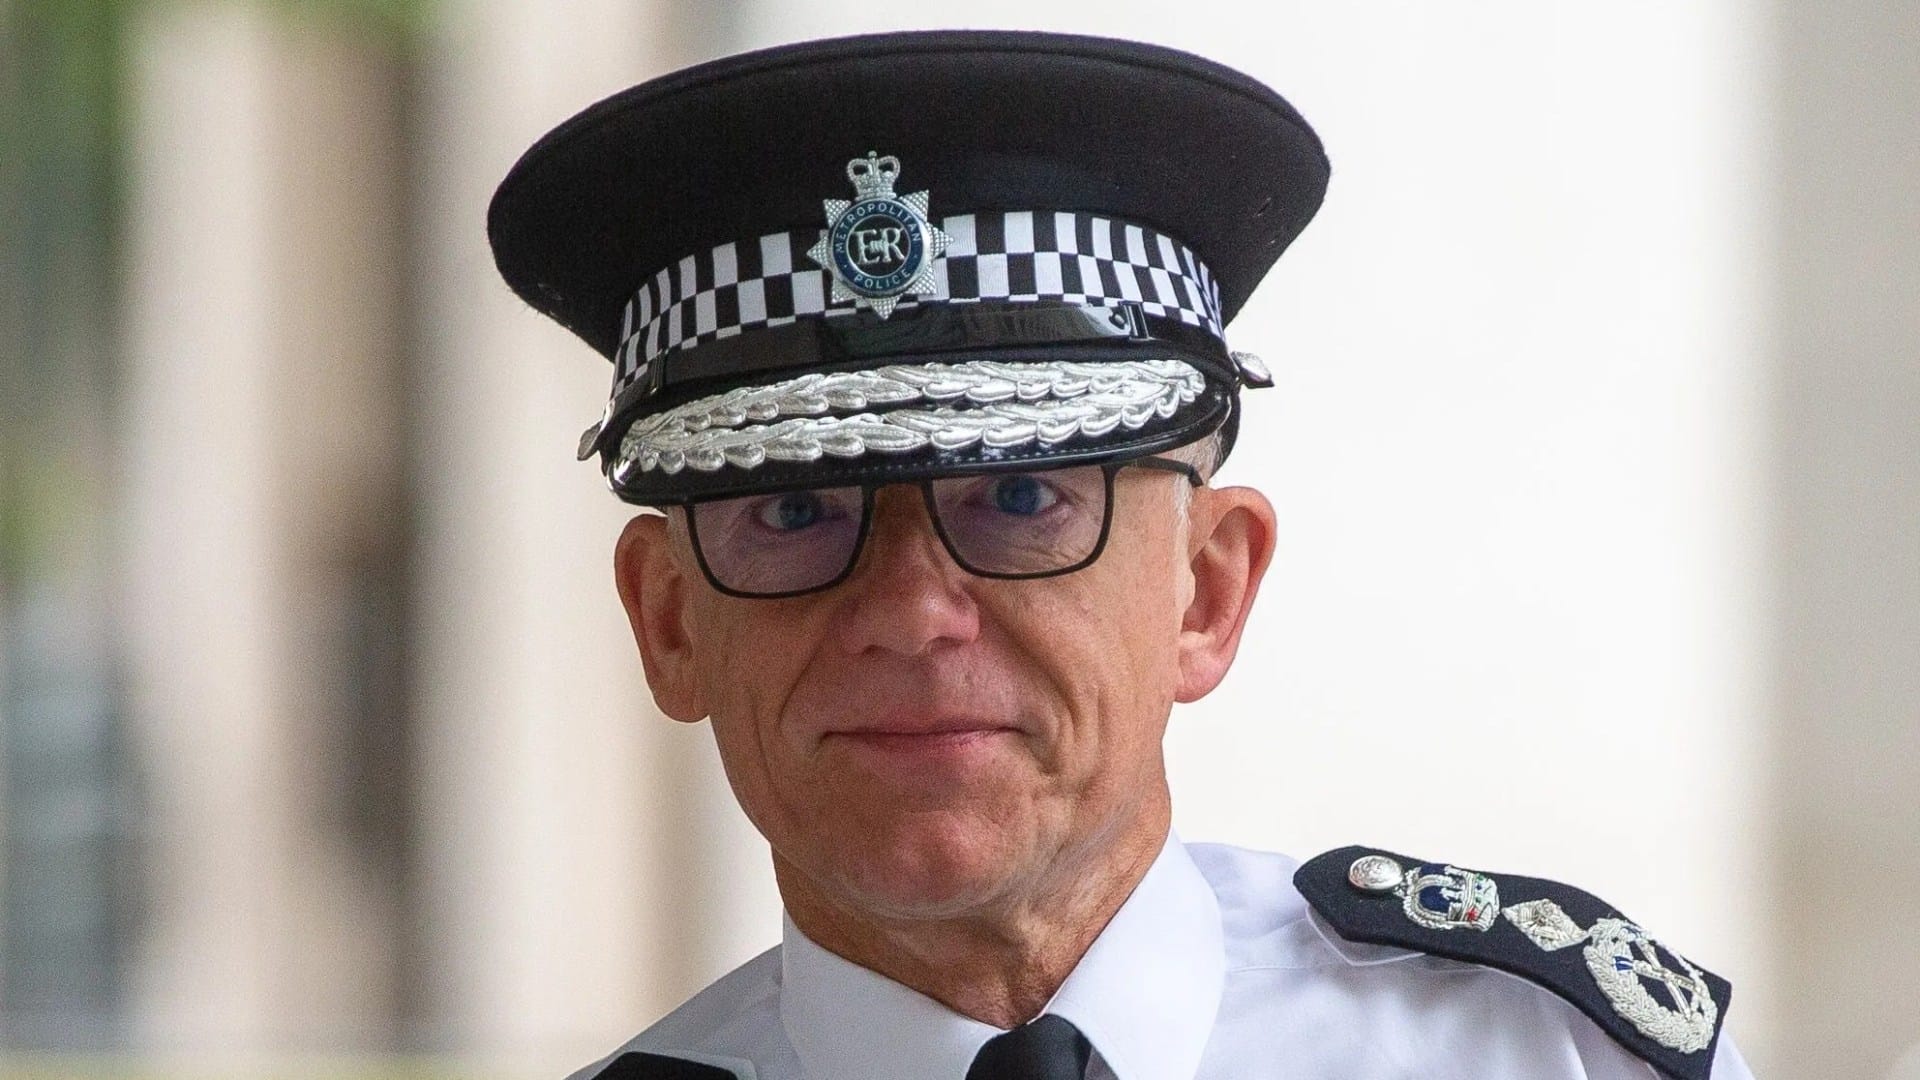 It's shocking my armed cops would rather face a terrorist than a gangster even though it's more dangerous, says Met boss